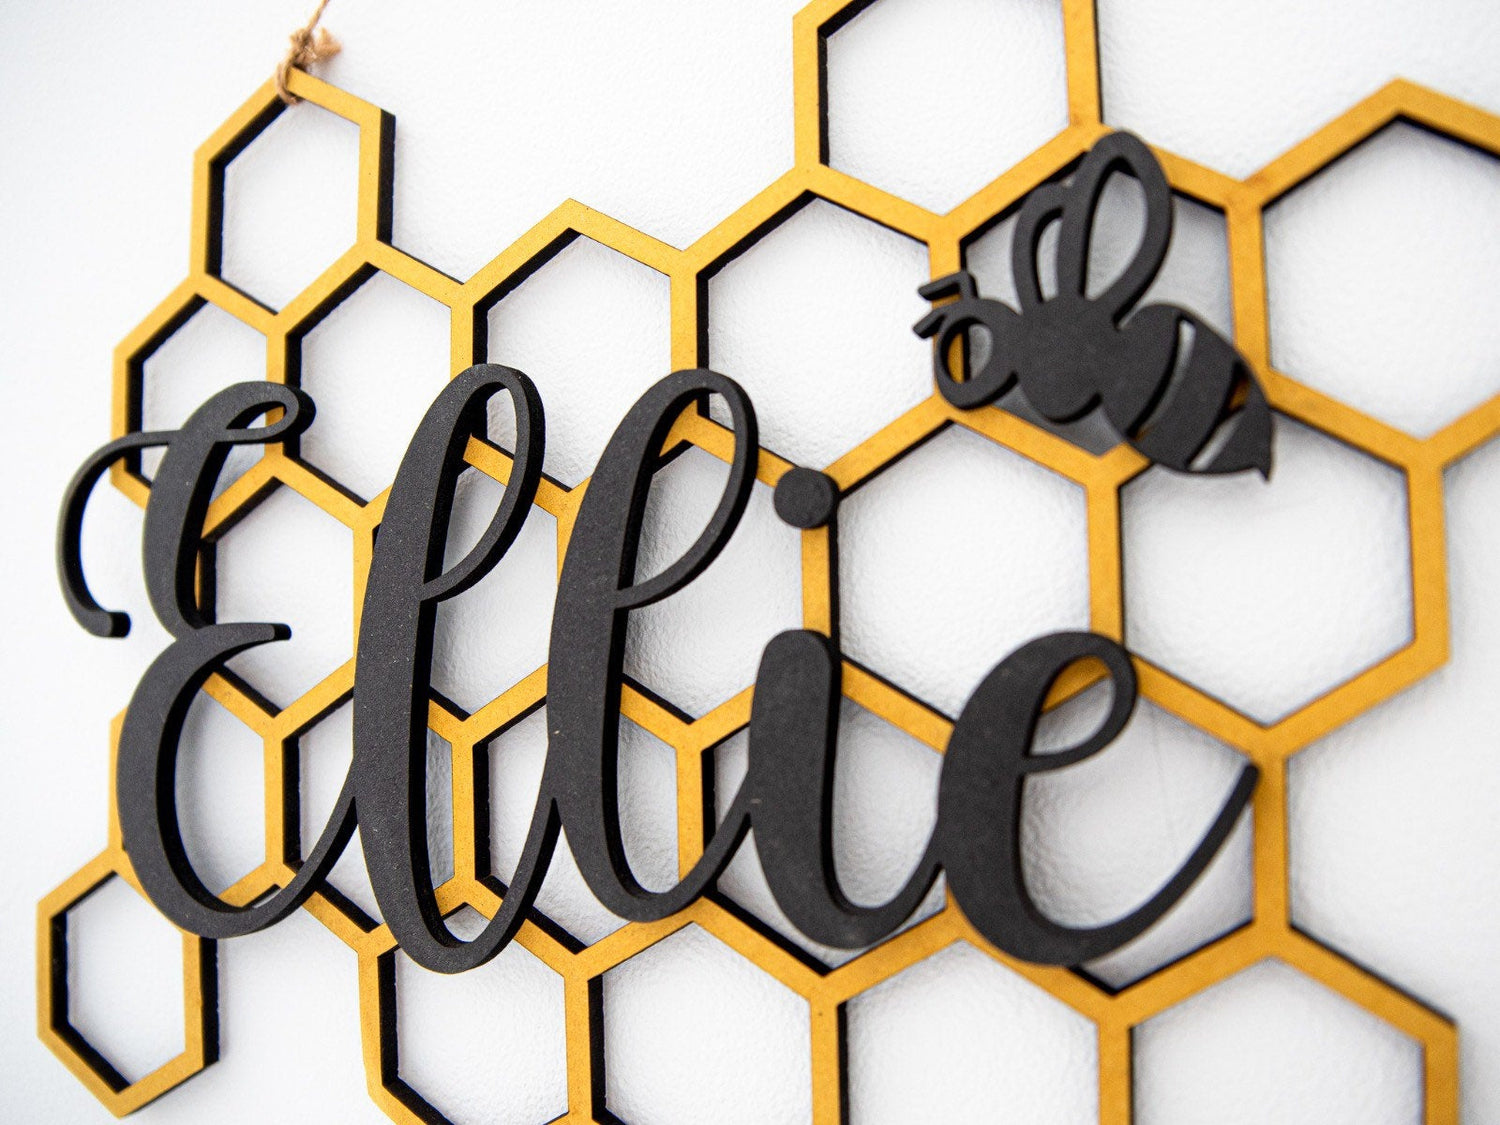 Personalised Hanging Name Sign | Nursery Decor | Children’s Bedroom | Bumble Bee Theme | Honeycomb & Bee Personalised Sign | Newborn Gift